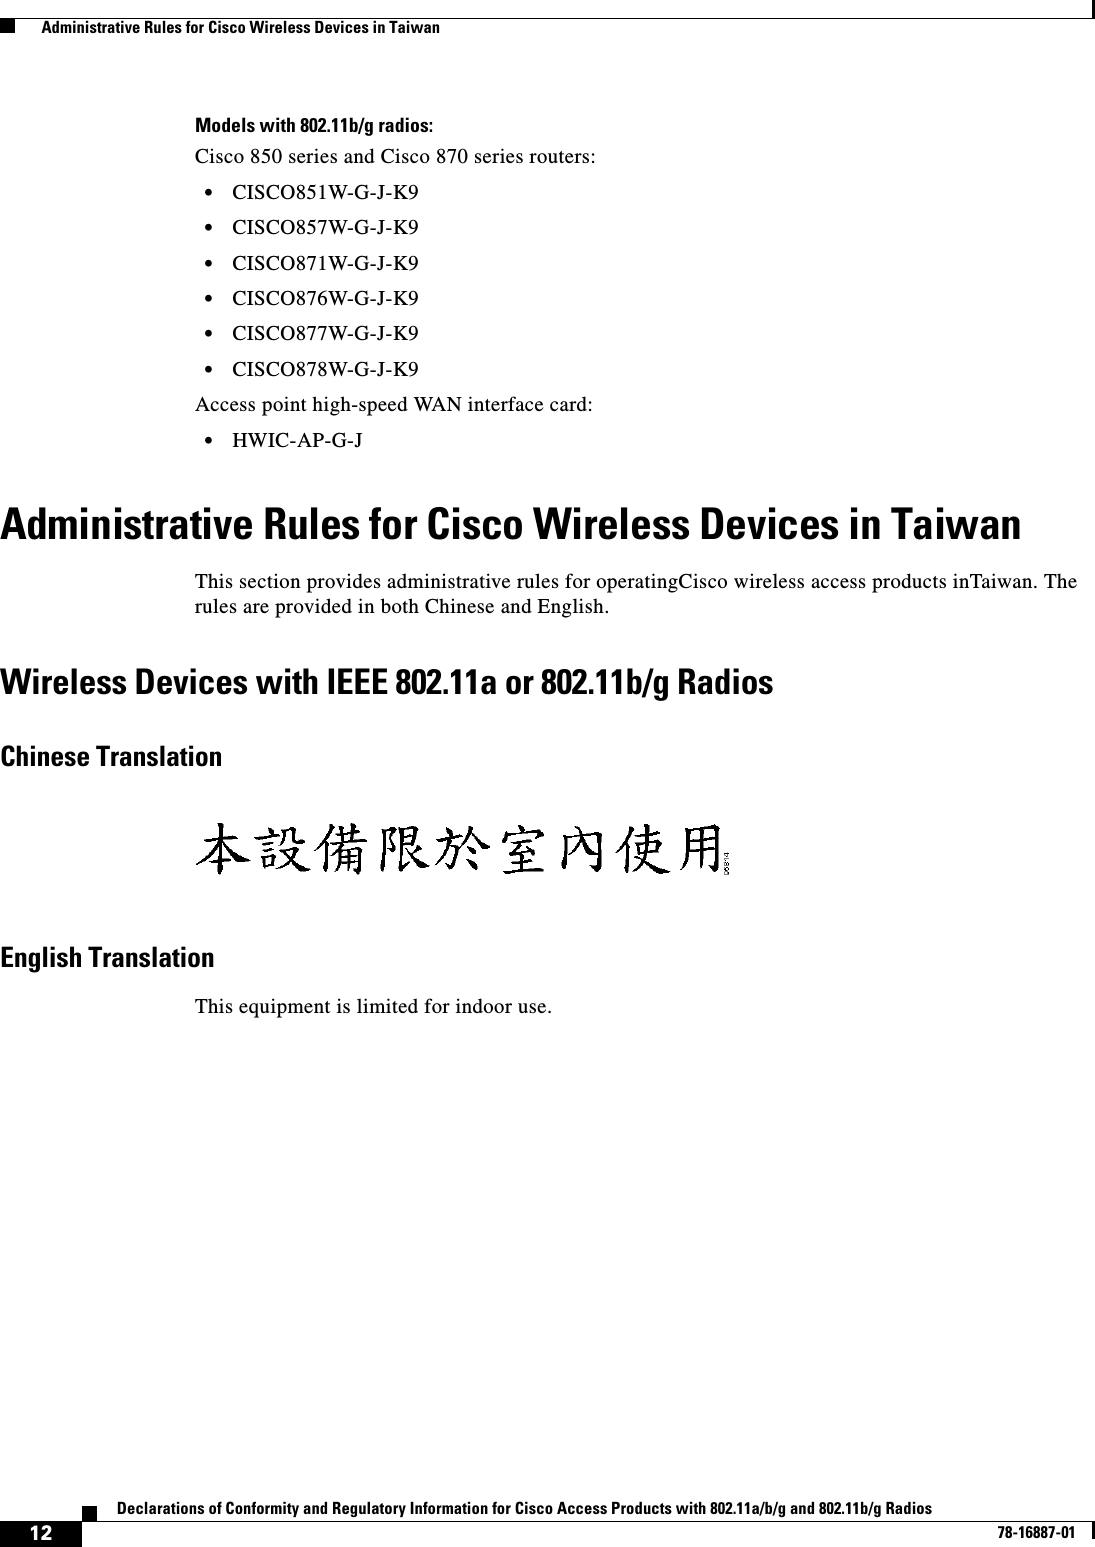  12Declarations of Conformity and Regulatory Information for Cisco Access Products with 802.11a/b/g and 802.11b/g Radios78-16887-01  Administrative Rules for Cisco Wireless Devices in TaiwanModels with 802.11b/g radios:Cisco 850 series and Cisco 870 series routers:•CISCO851W-G-J-K9•CISCO857W-G-J-K9•CISCO871W-G-J-K9•CISCO876W-G-J-K9•CISCO877W-G-J-K9•CISCO878W-G-J-K9Access point high-speed WAN interface card:•HWIC-AP-G-JAdministrative Rules for Cisco Wireless Devices in TaiwanThis section provides administrative rules for operatingCisco wireless access products inTaiwan. The rules are provided in both Chinese and English.Wireless Devices with IEEE 802.11a or 802.11b/g Radios Chinese TranslationEnglish TranslationThis equipment is limited for indoor use.